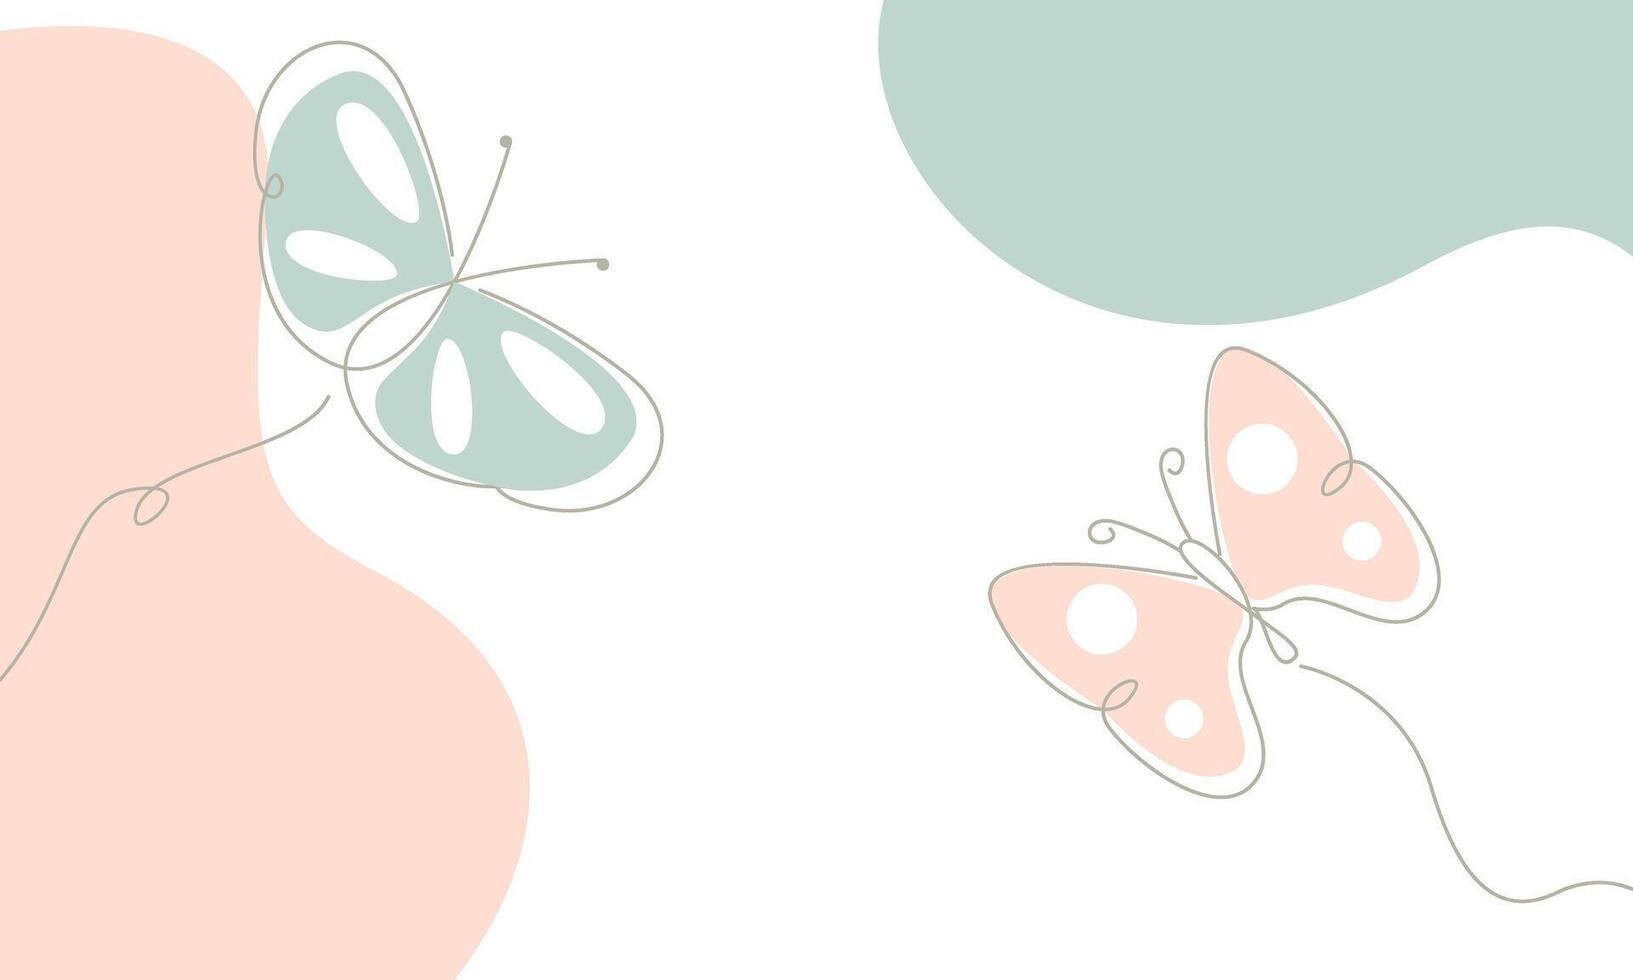 Beautiful butterfly outline background vector